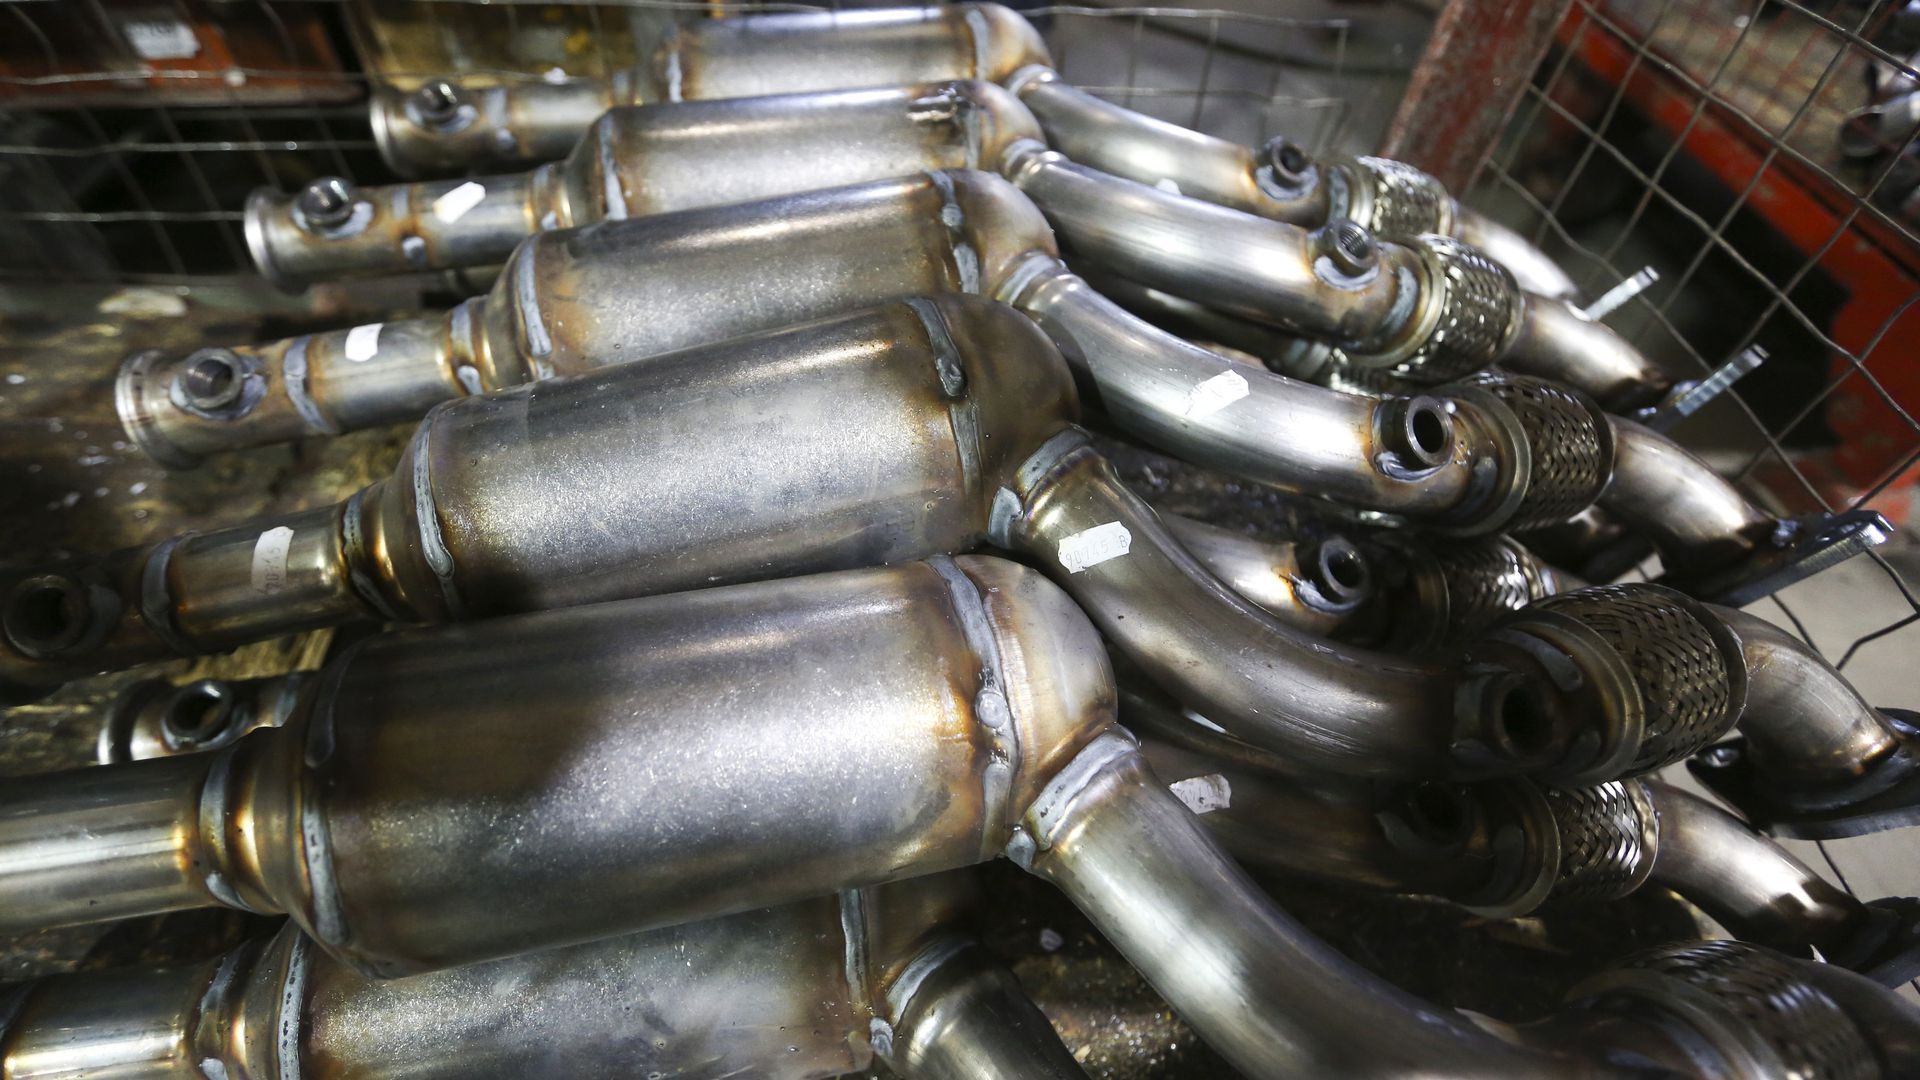 More than a dozen catalytic converters lay on top of each other.